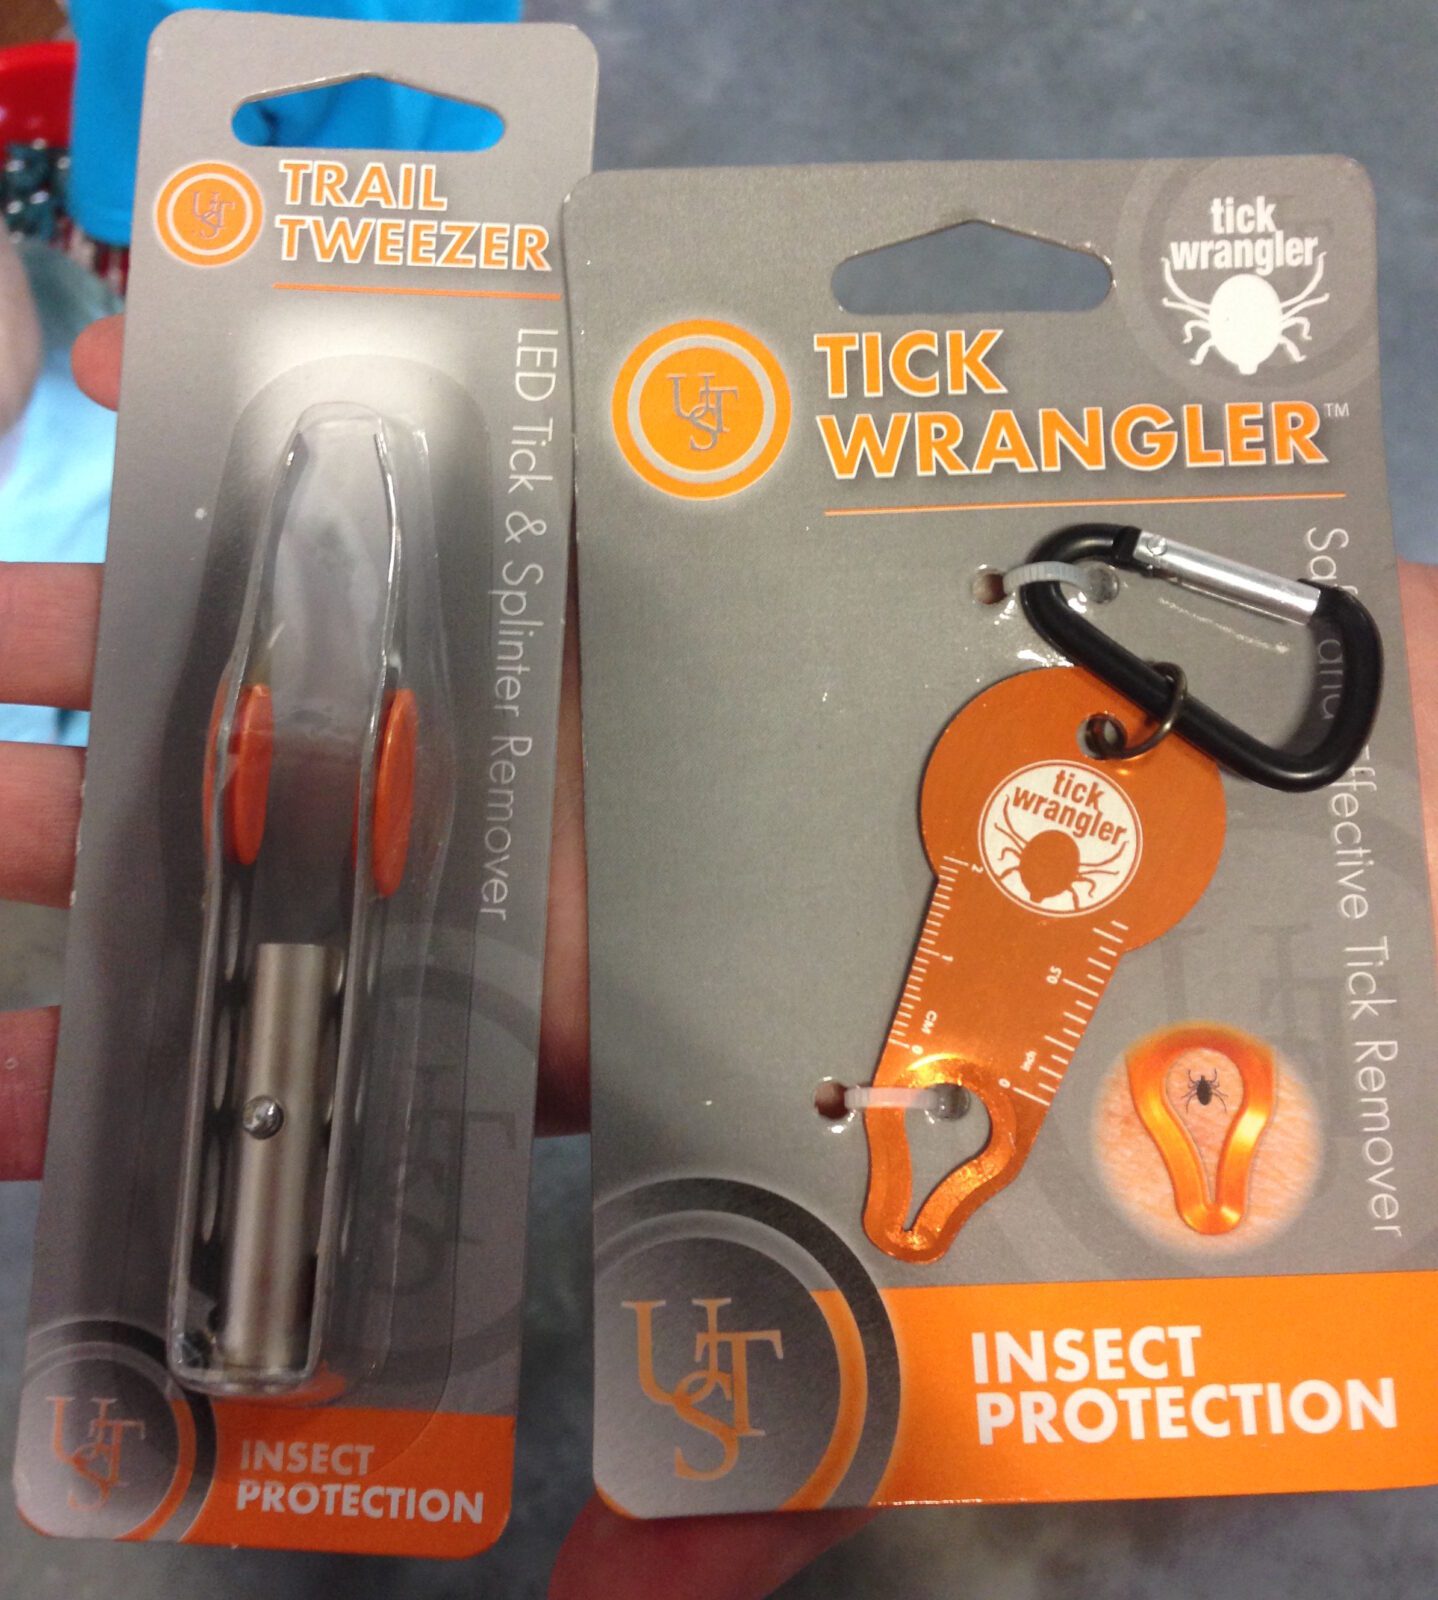 Tick removal devices